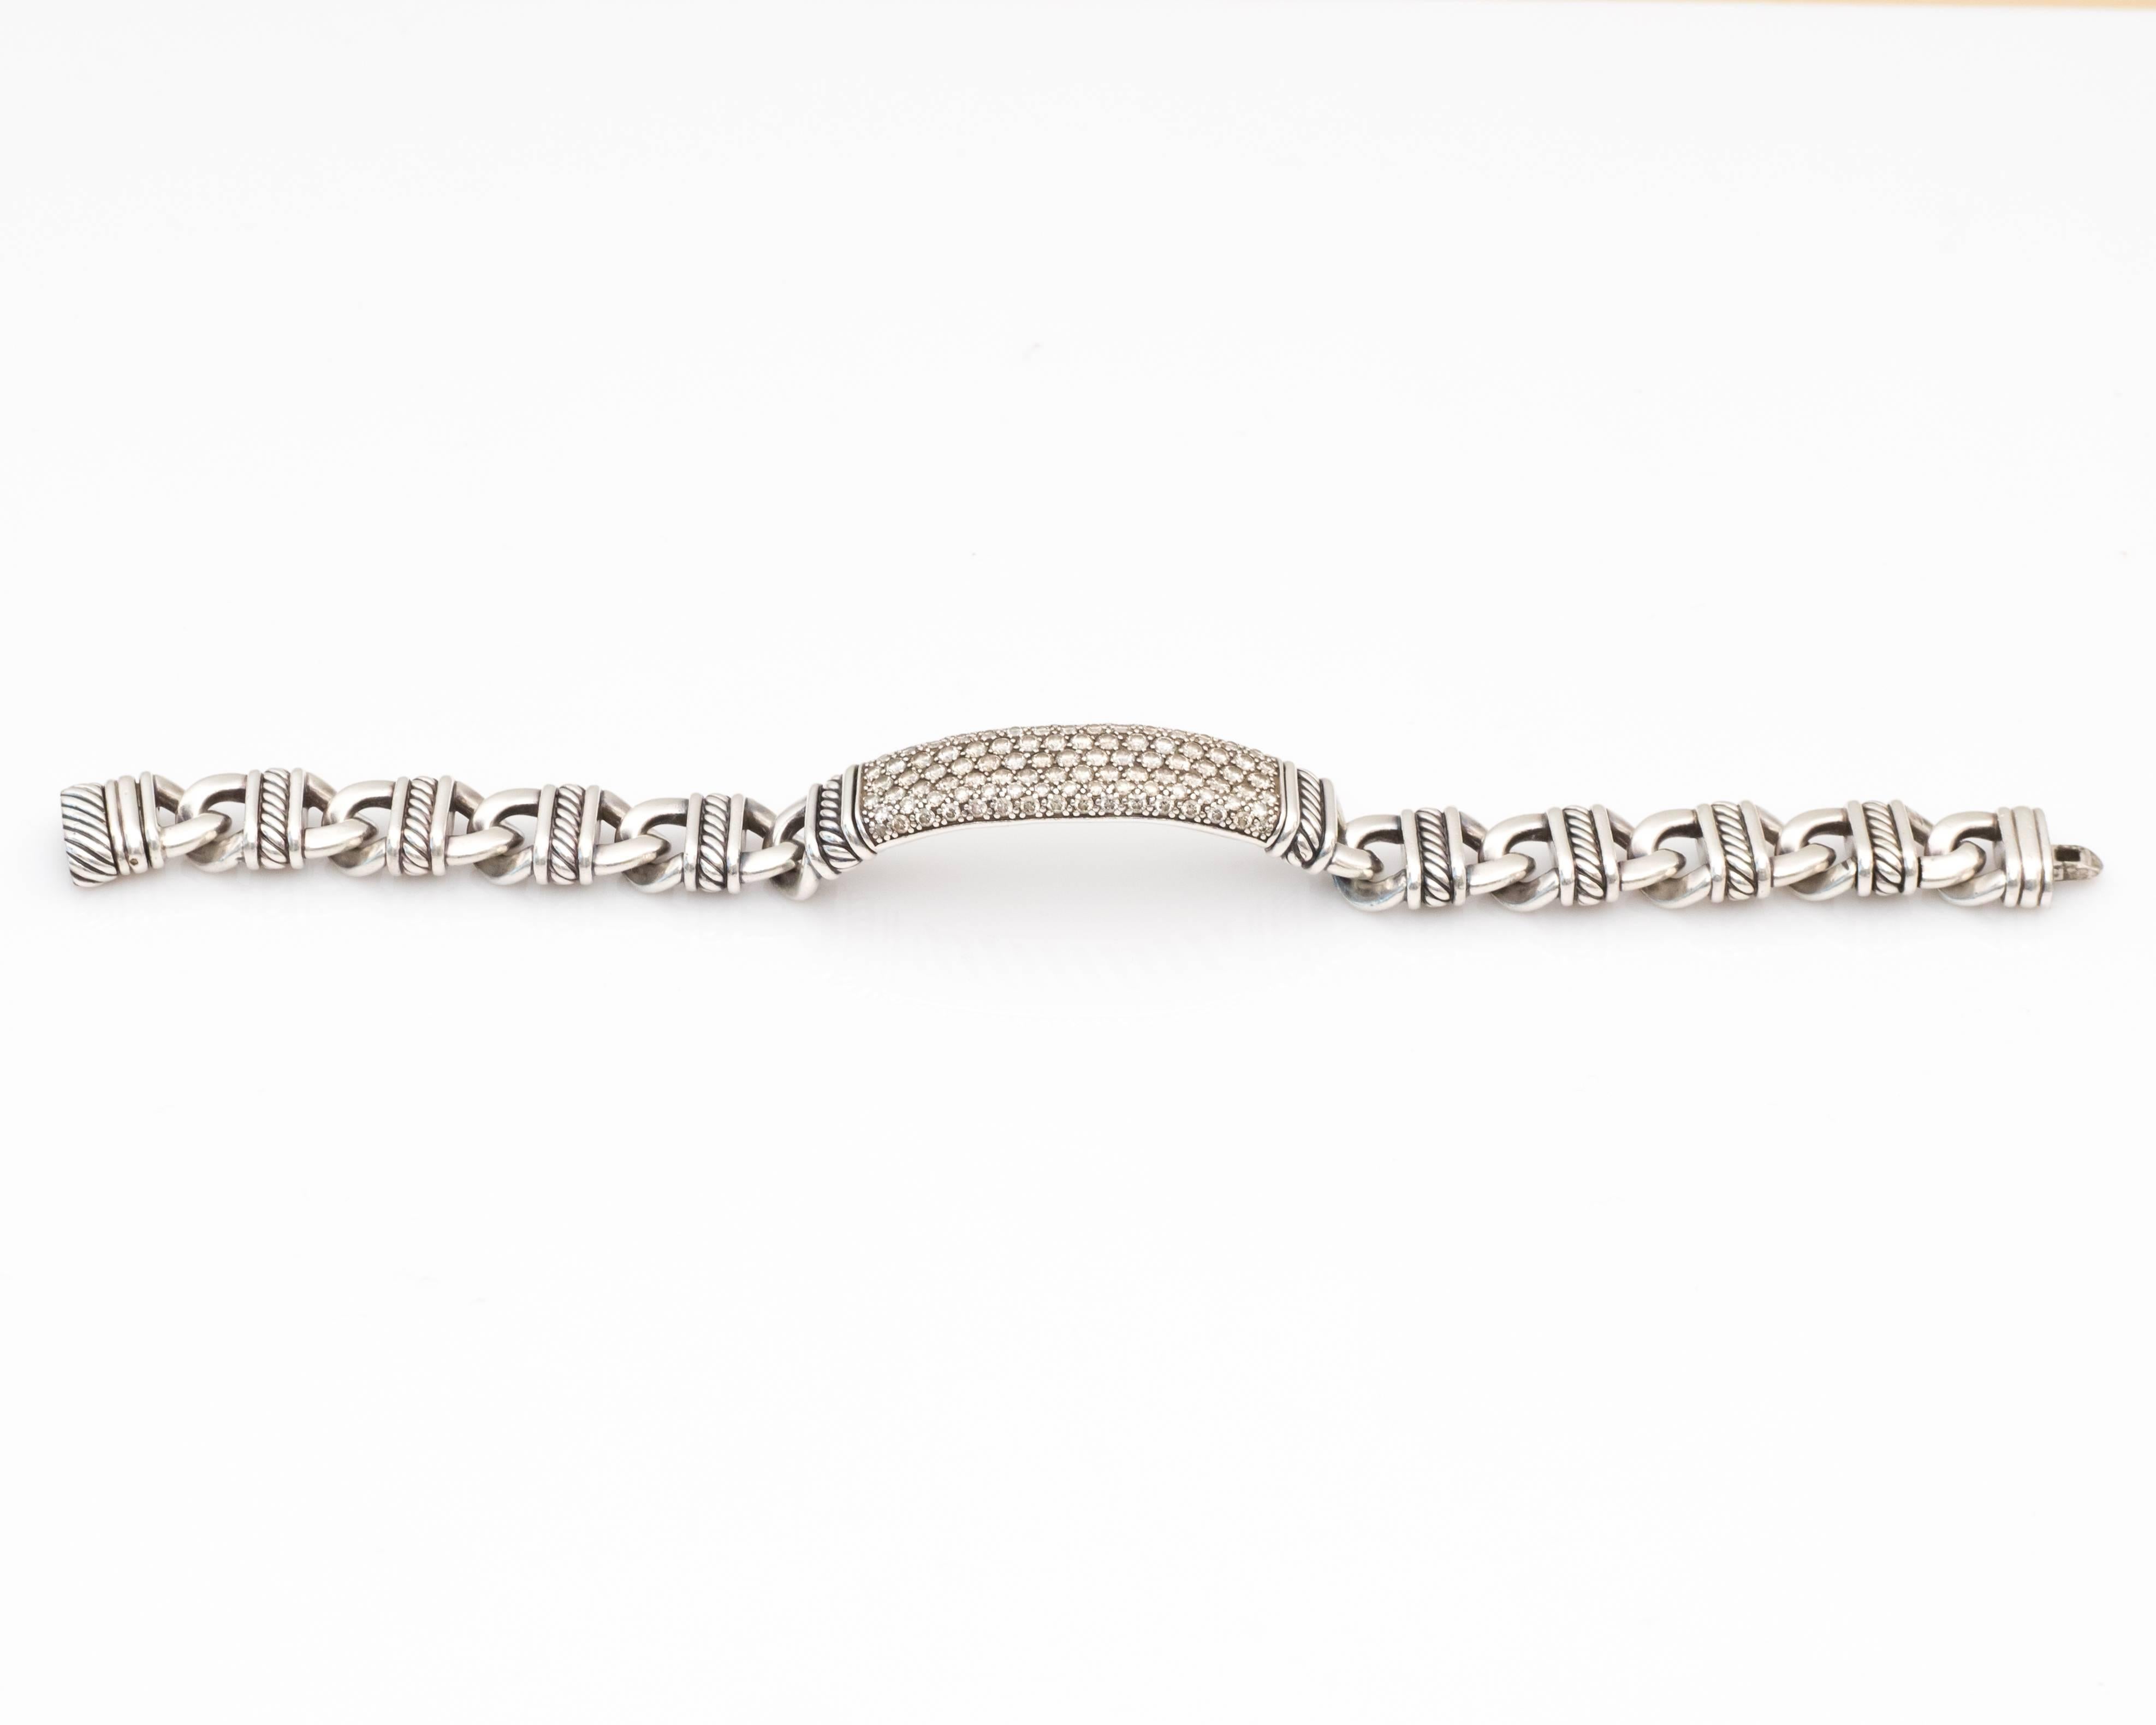 Iconic Designer David Yurman Bracelet from 1990s
Crafted in Sterling Silver

Center of Bracelet is encrusted in diamonds, weighing a total of 4.5 Carats of Diamonds, all Round Brilliant, F-J Color, VS-SI Clarity.
Total of 109 diamonds. 

Remainder